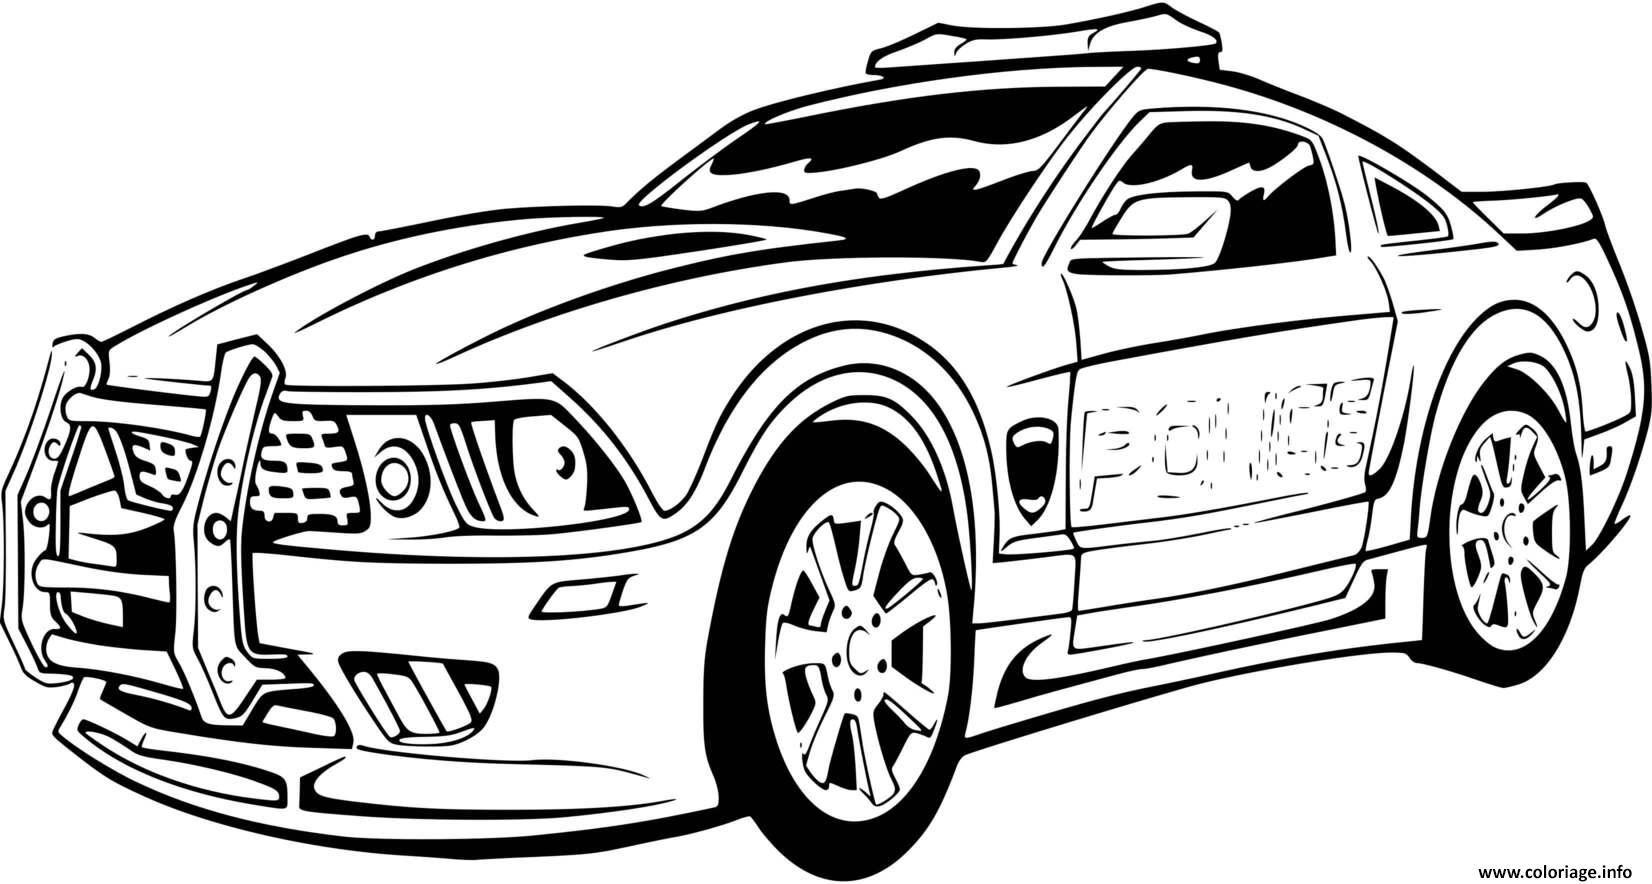 Coloriage voiture de police sport mustang ford  JeColorie.com